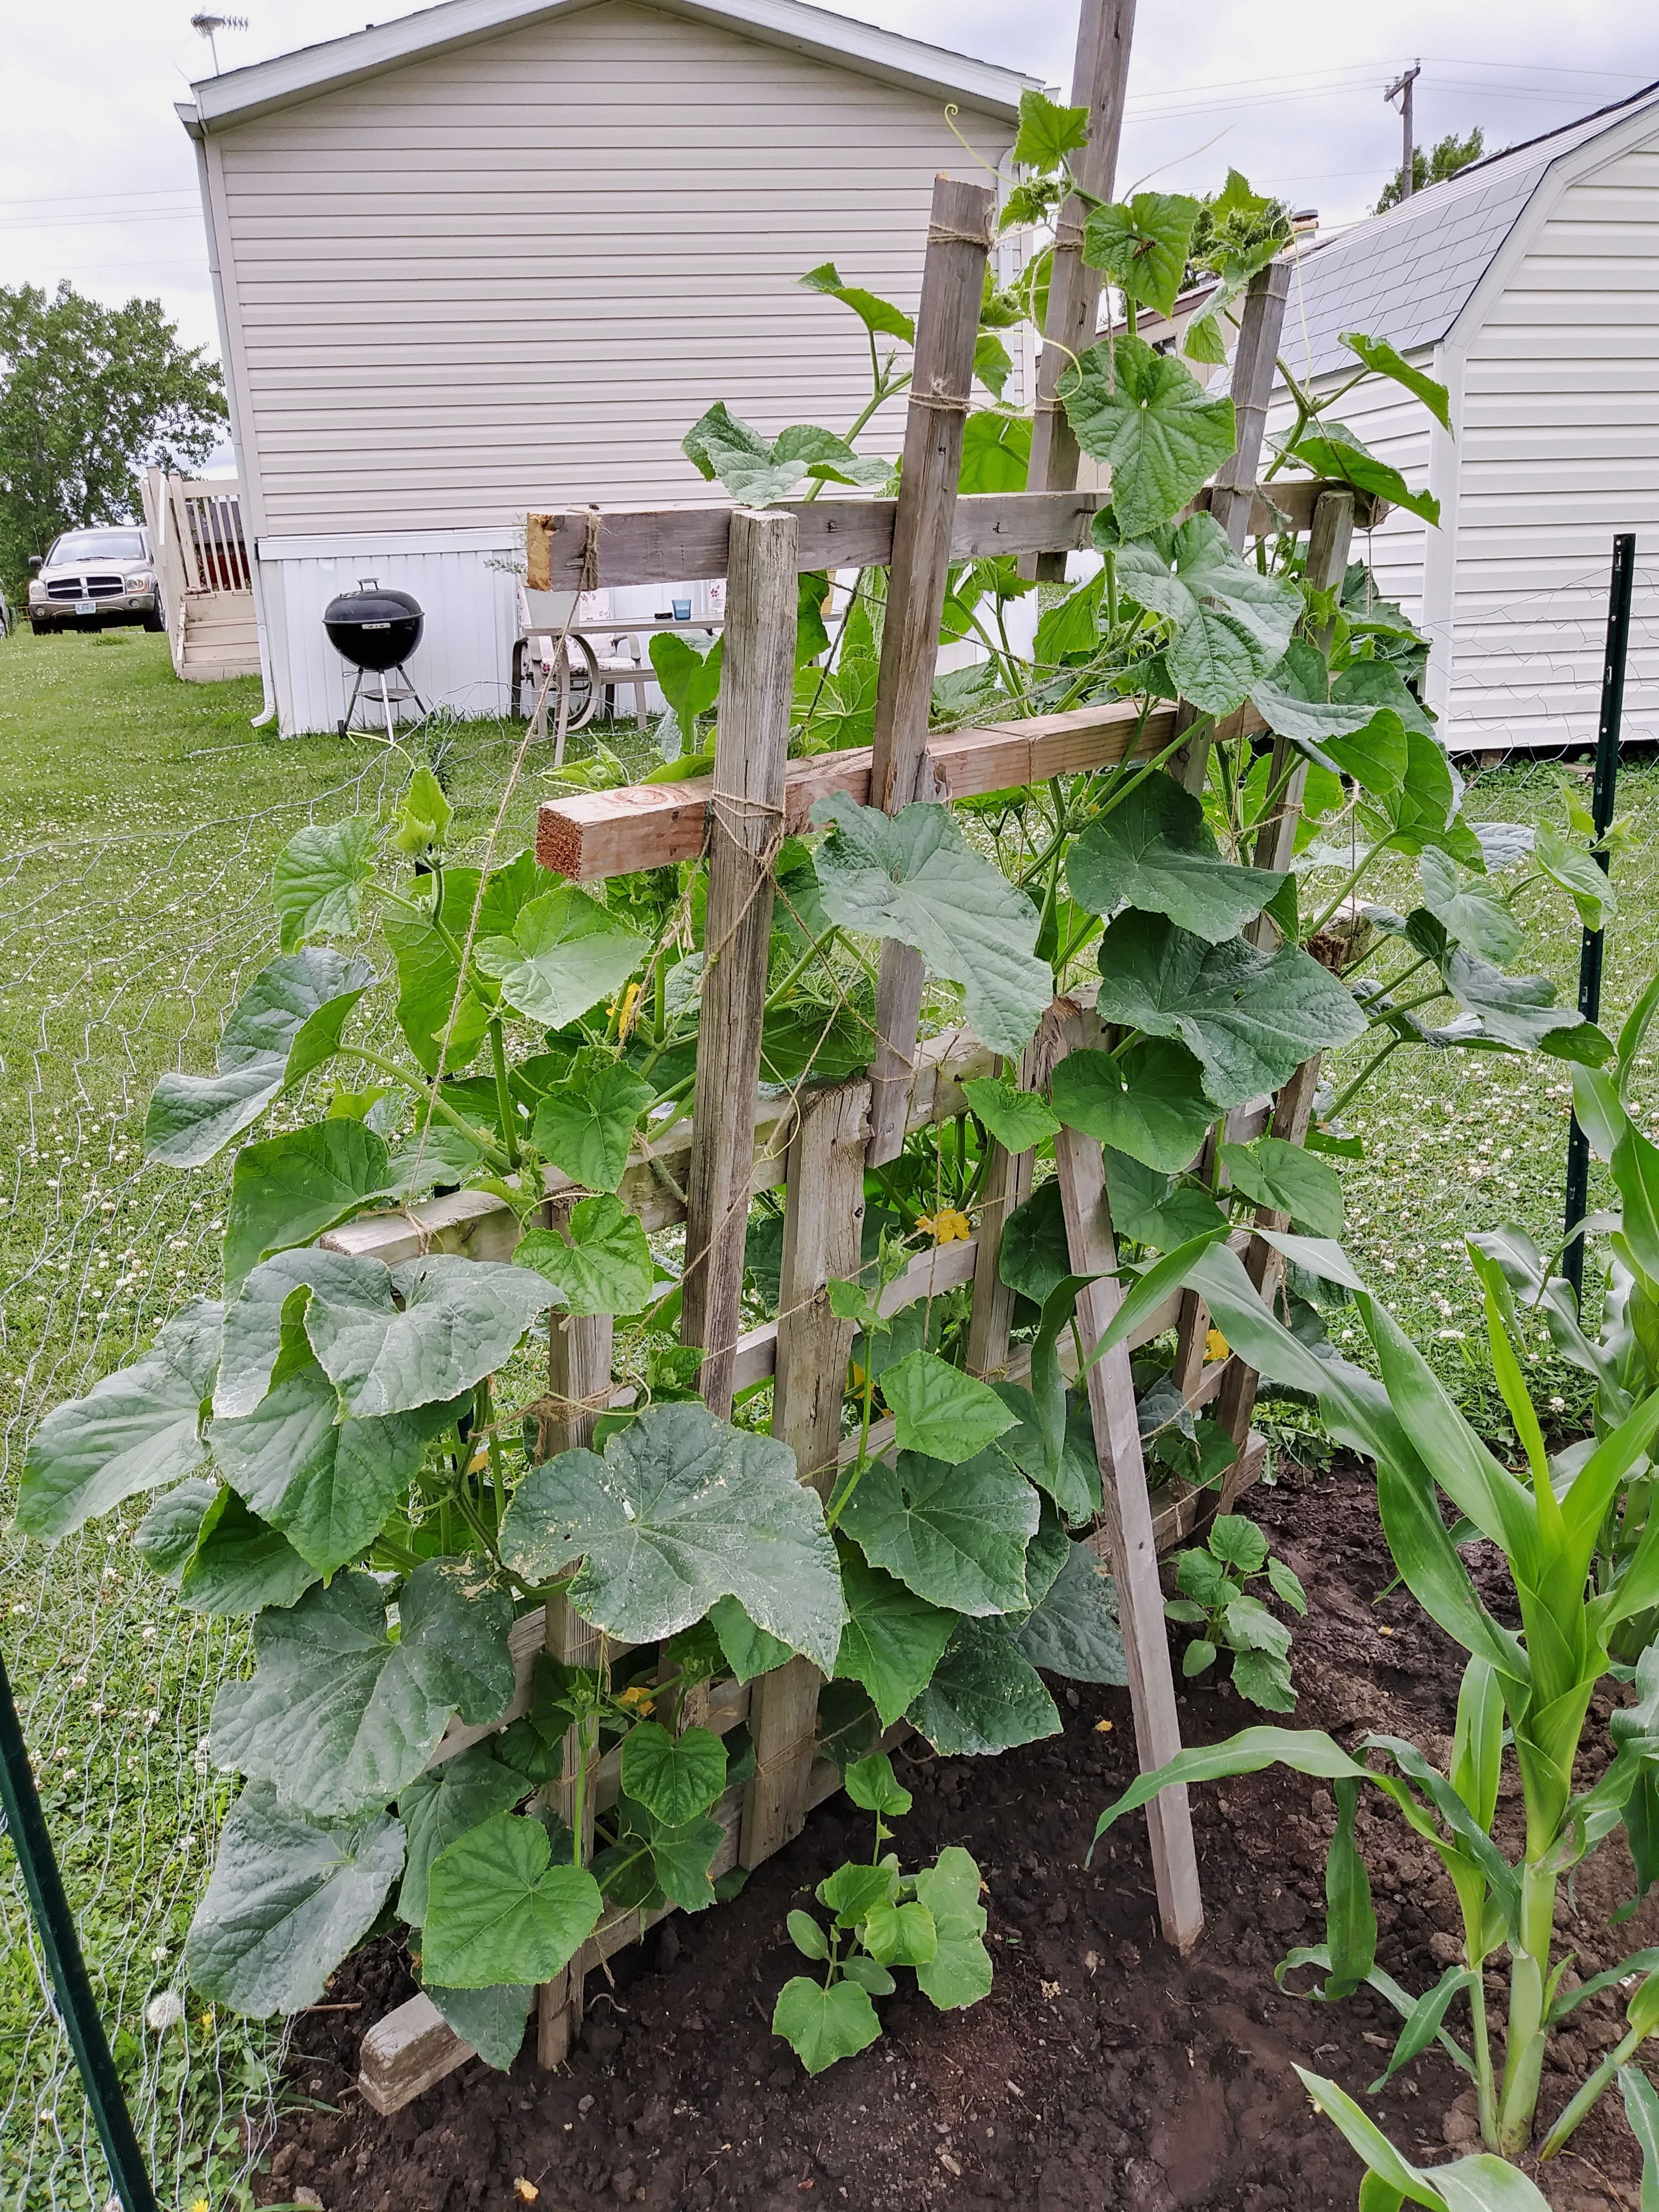 making a cucumber fence: growing cucumbers on a fence